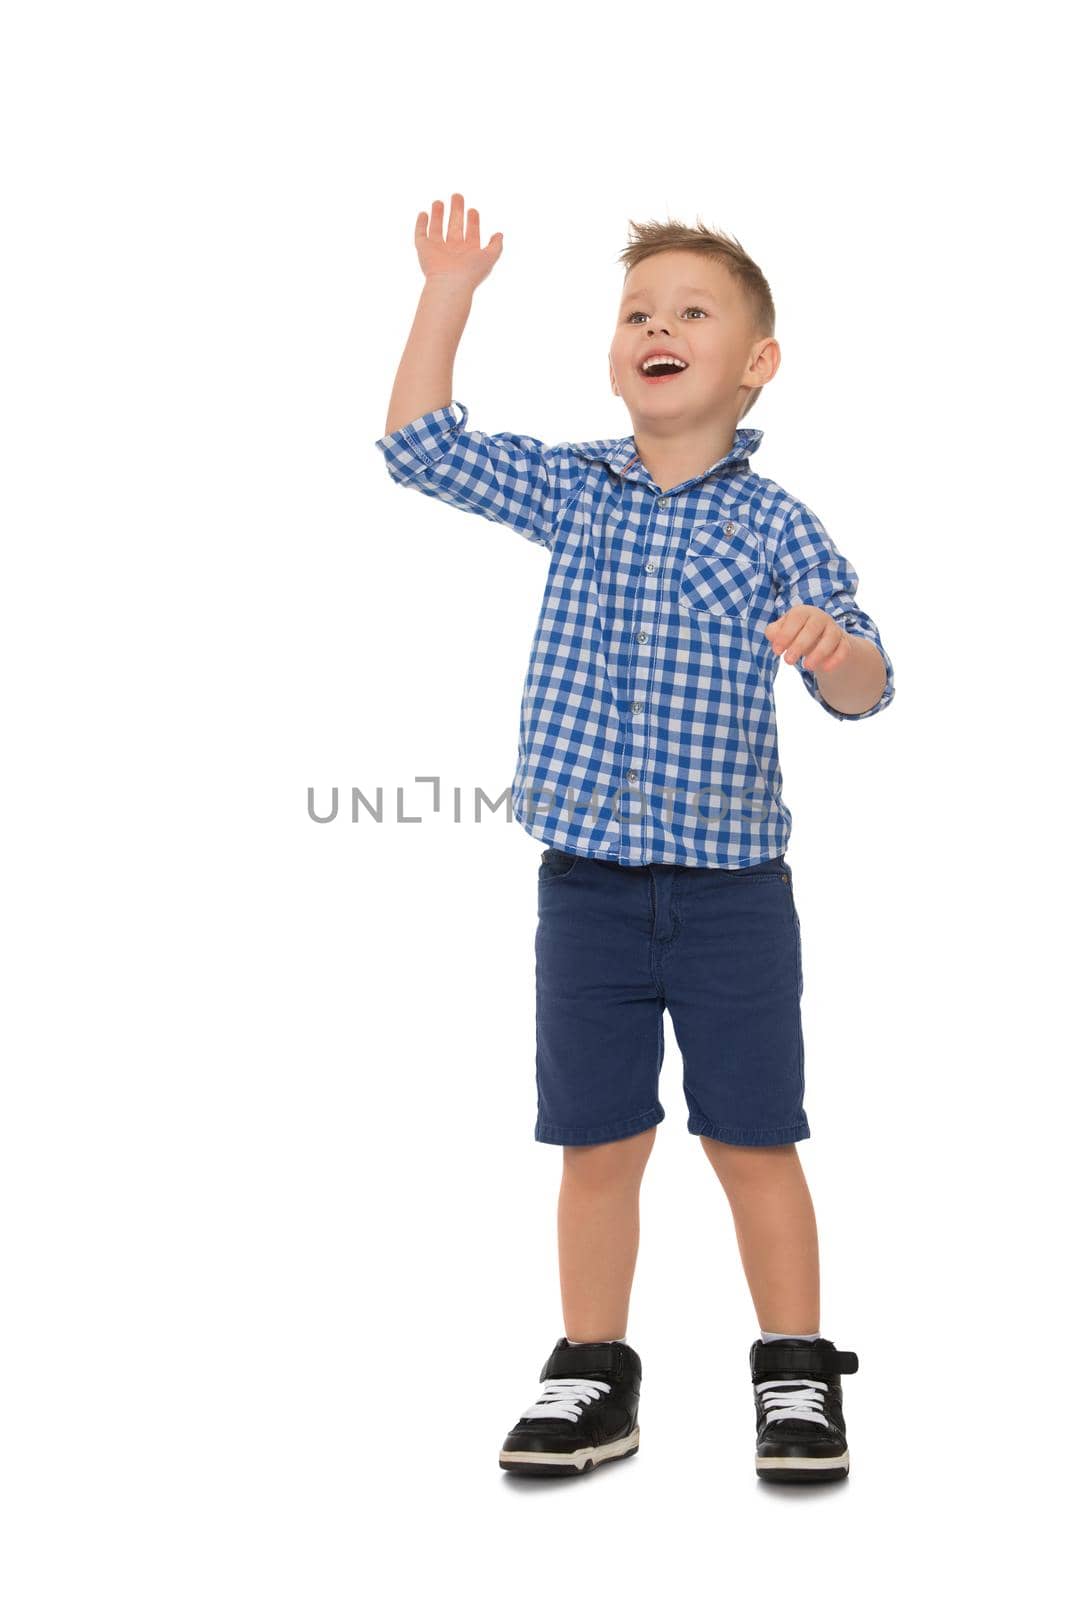 Nice little boy in shirt and shorts waving - Isolated on white background